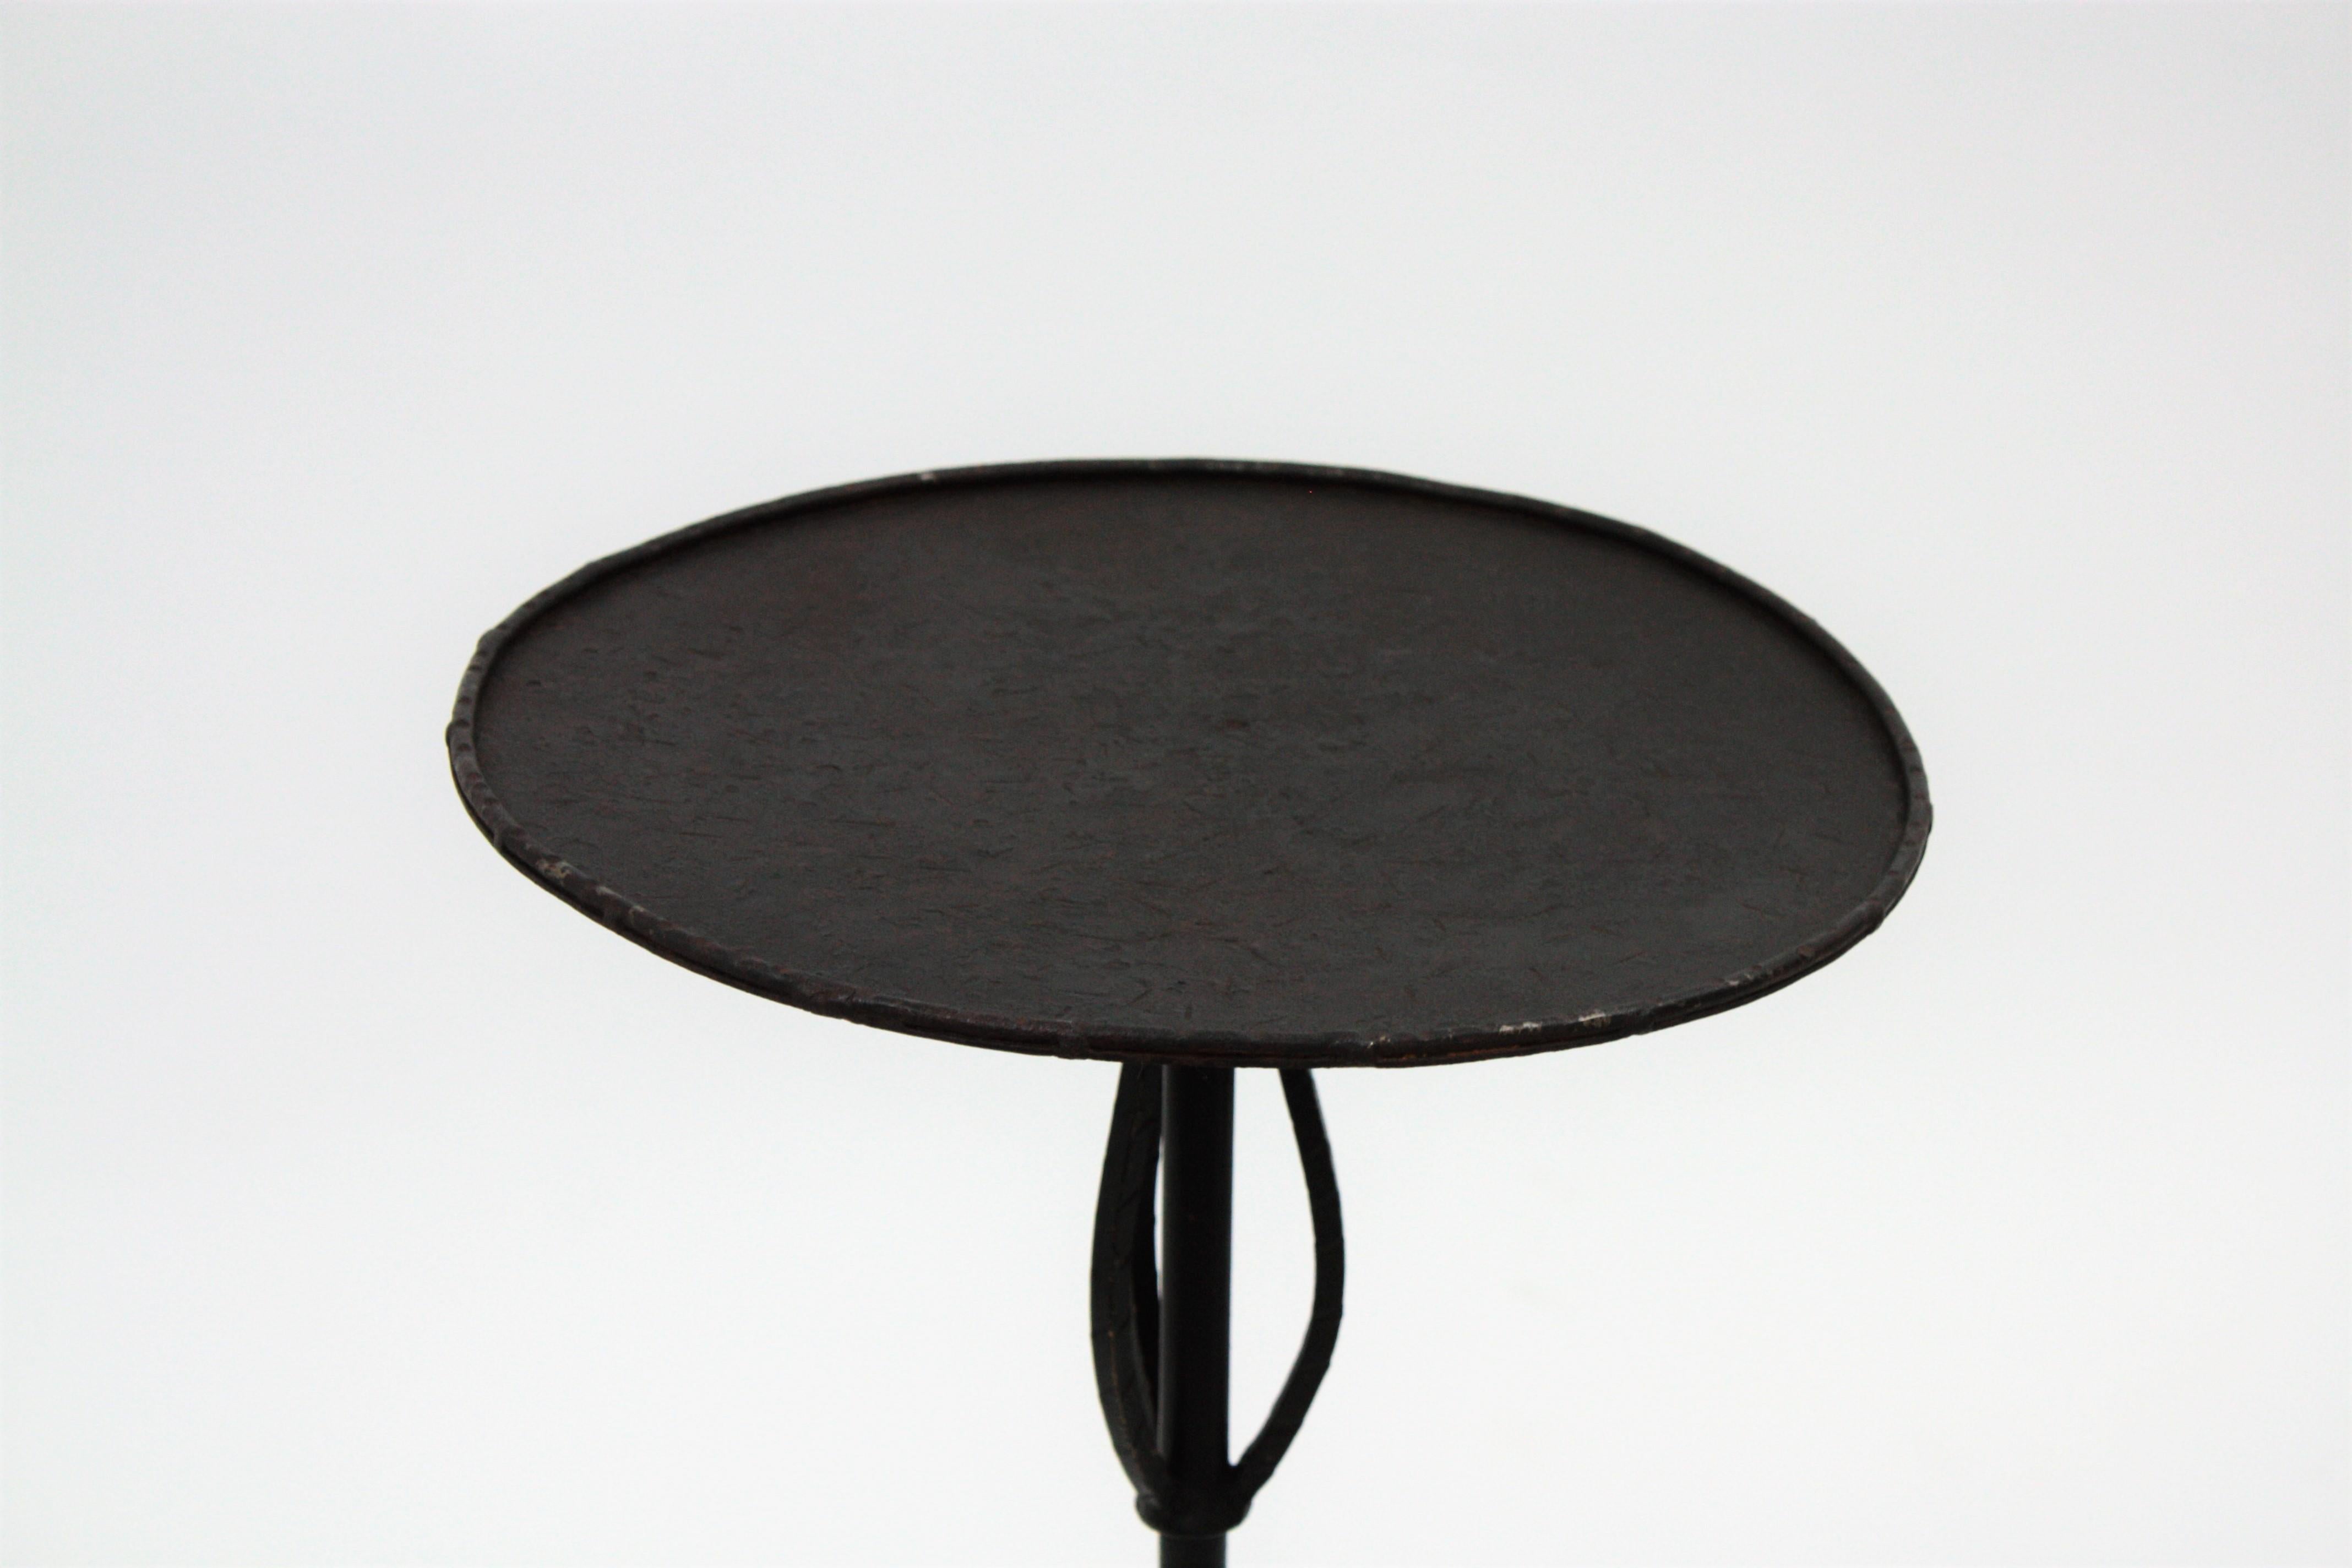 Hammered Spanish 1950s Wrought Iron Pedestal Drinks Table / Gueridon on a Tripod Base